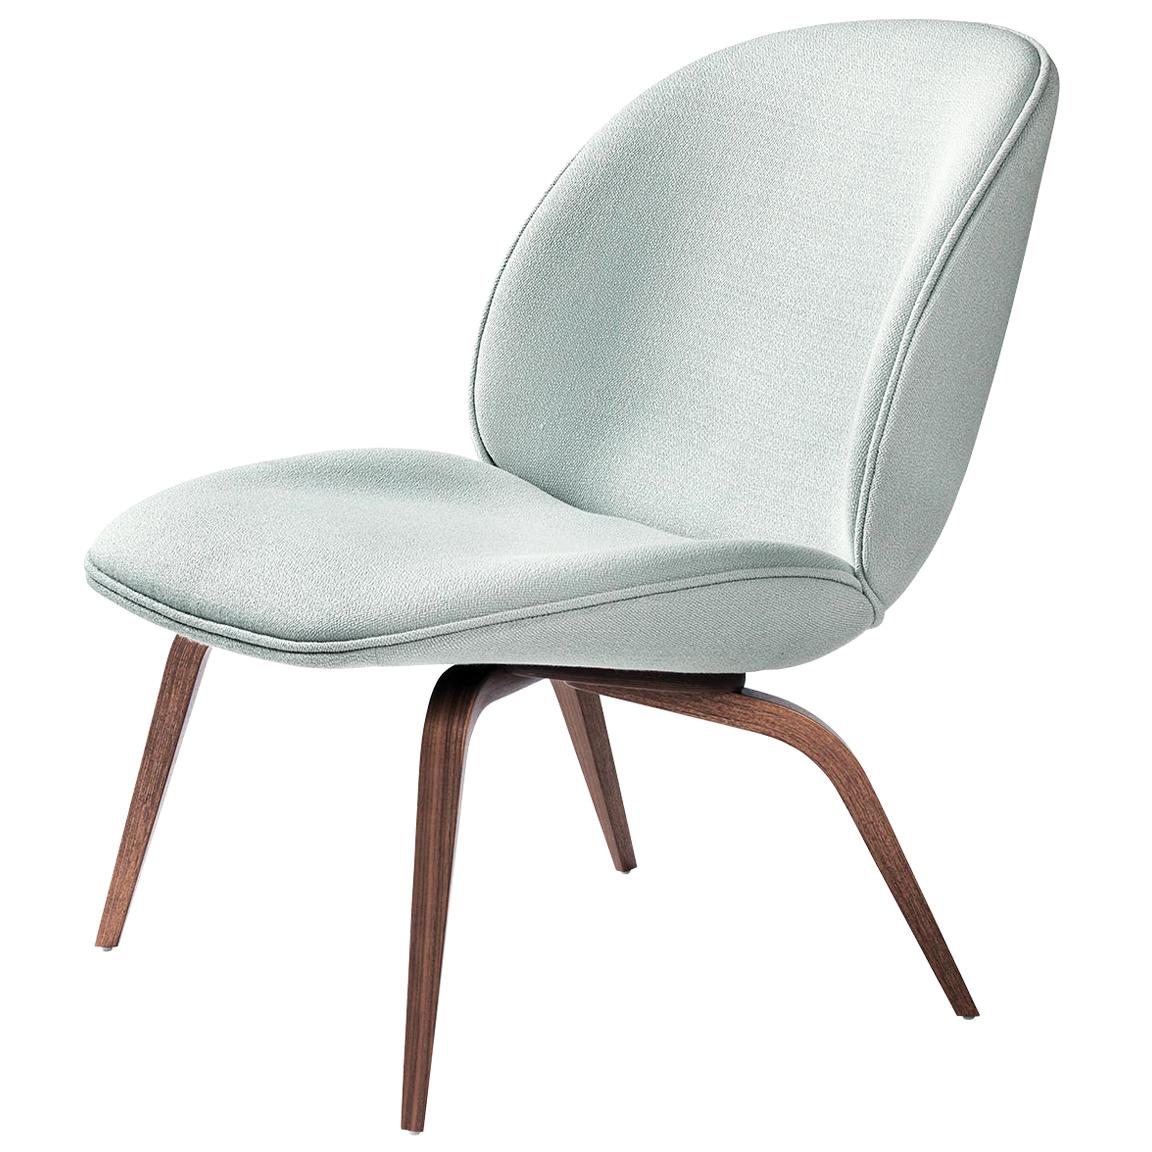 Beetle Lounge Chair, Fully Upholstered, Wood Base, American Walnut